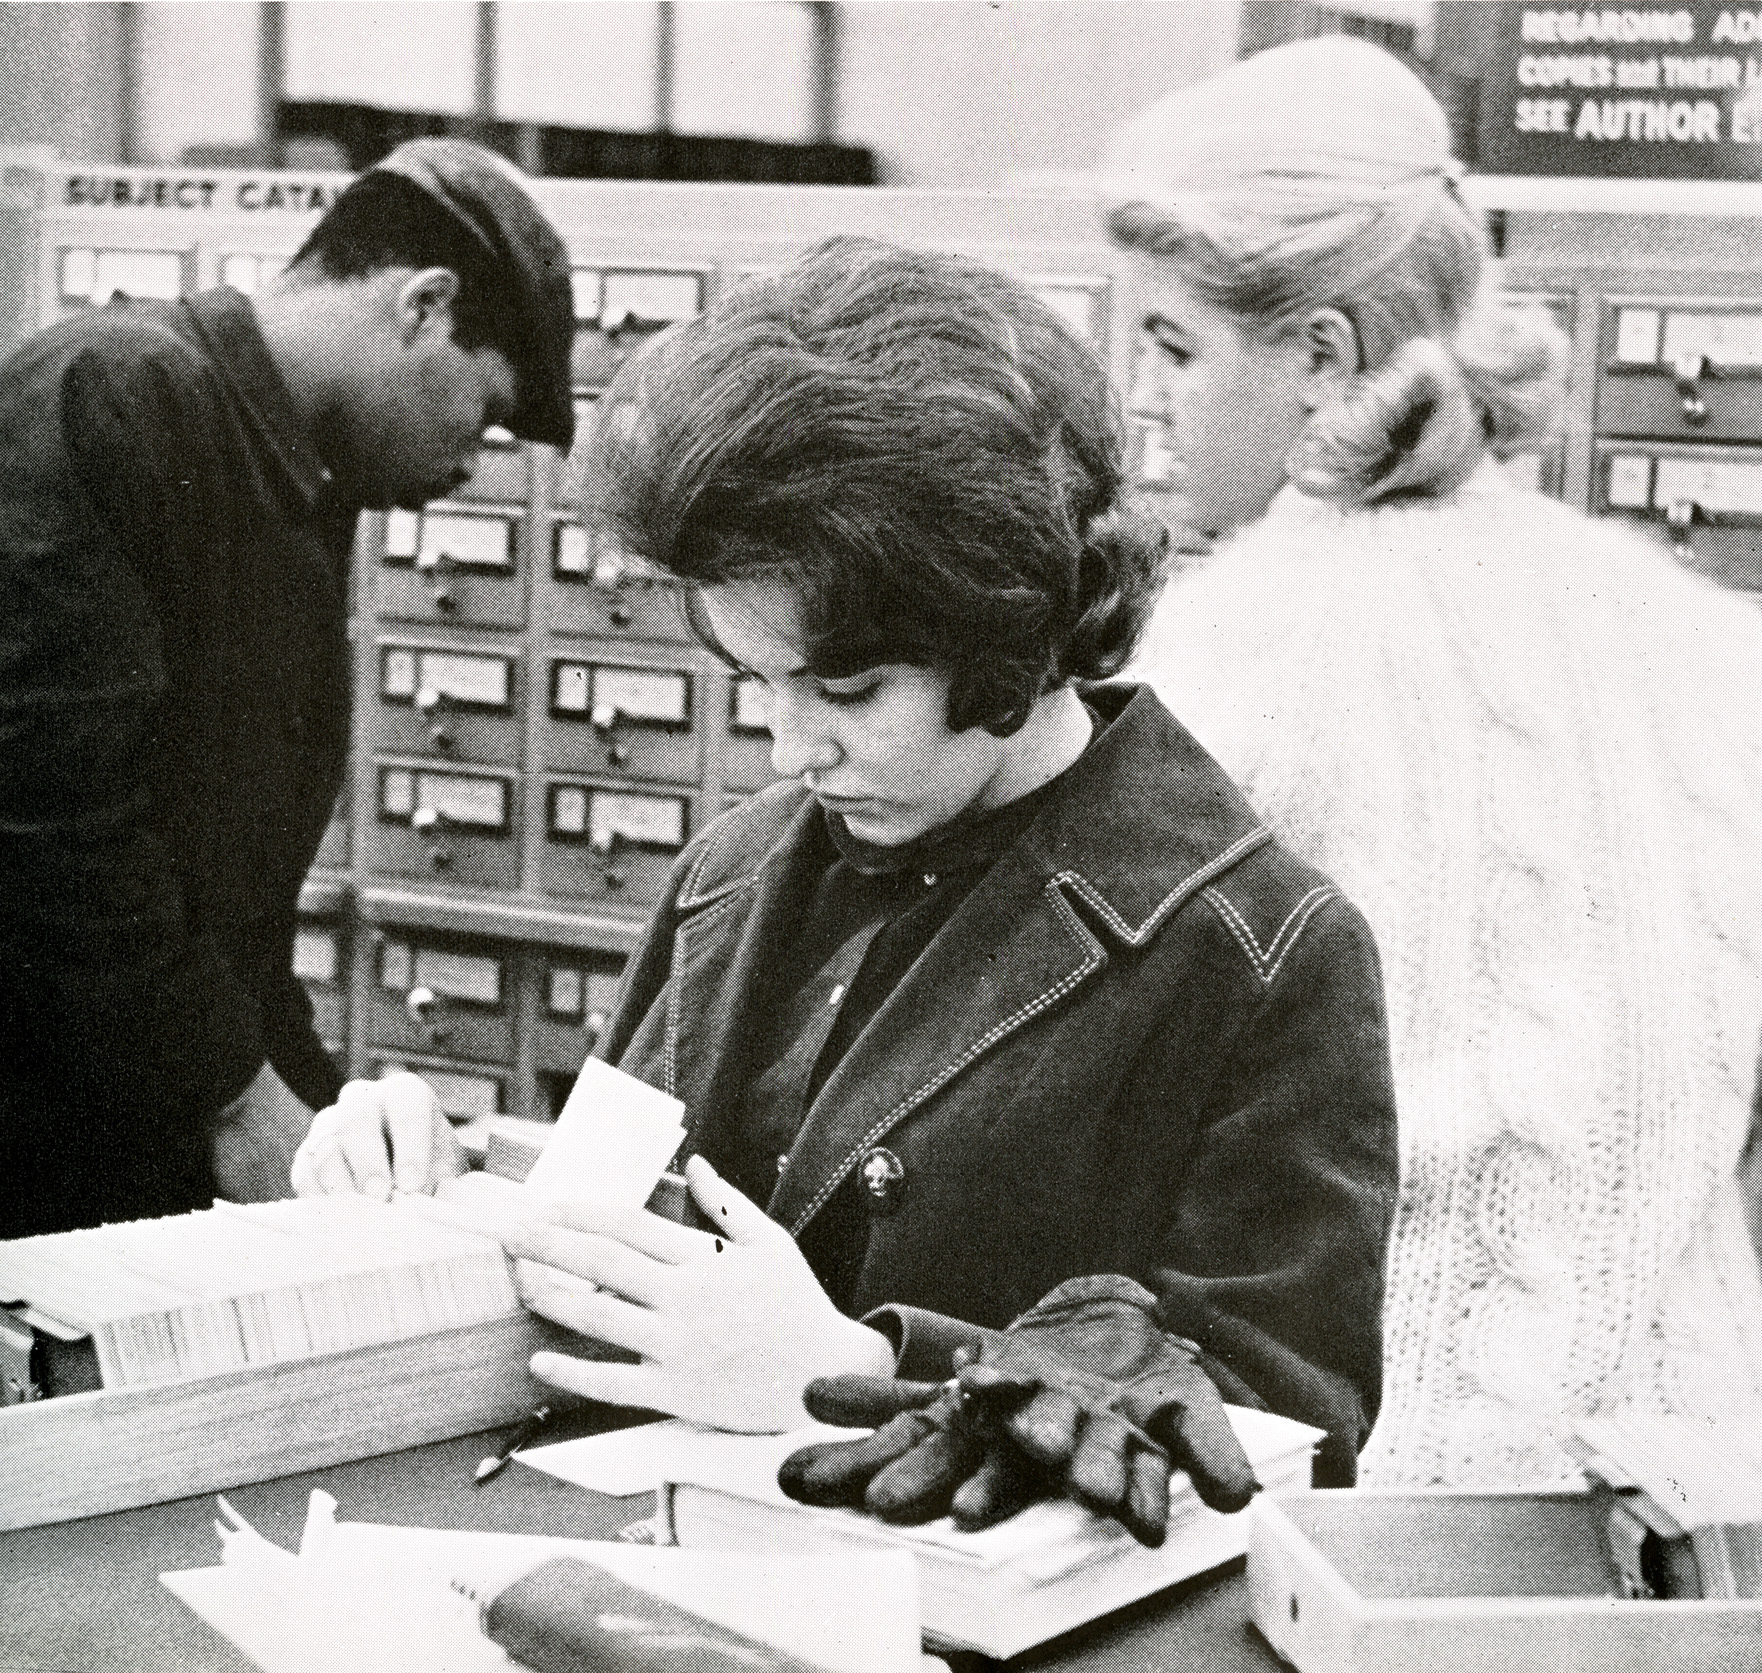 Three students access catalogue cards in the library, circa 1964